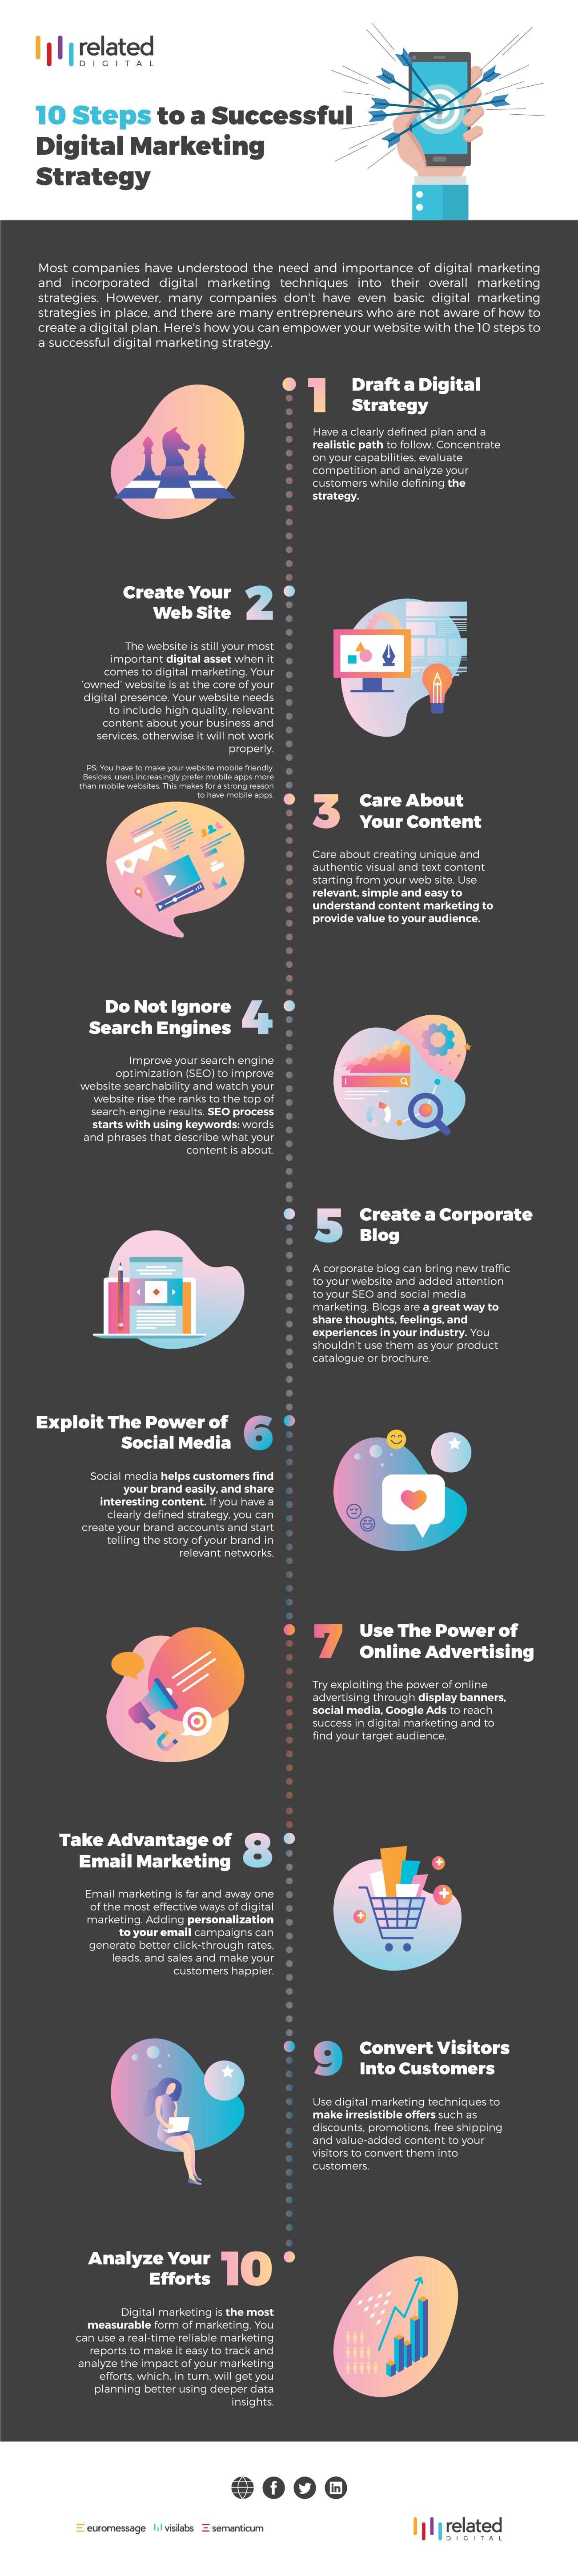 10-steps-to-successful-digital-marketing-strategy